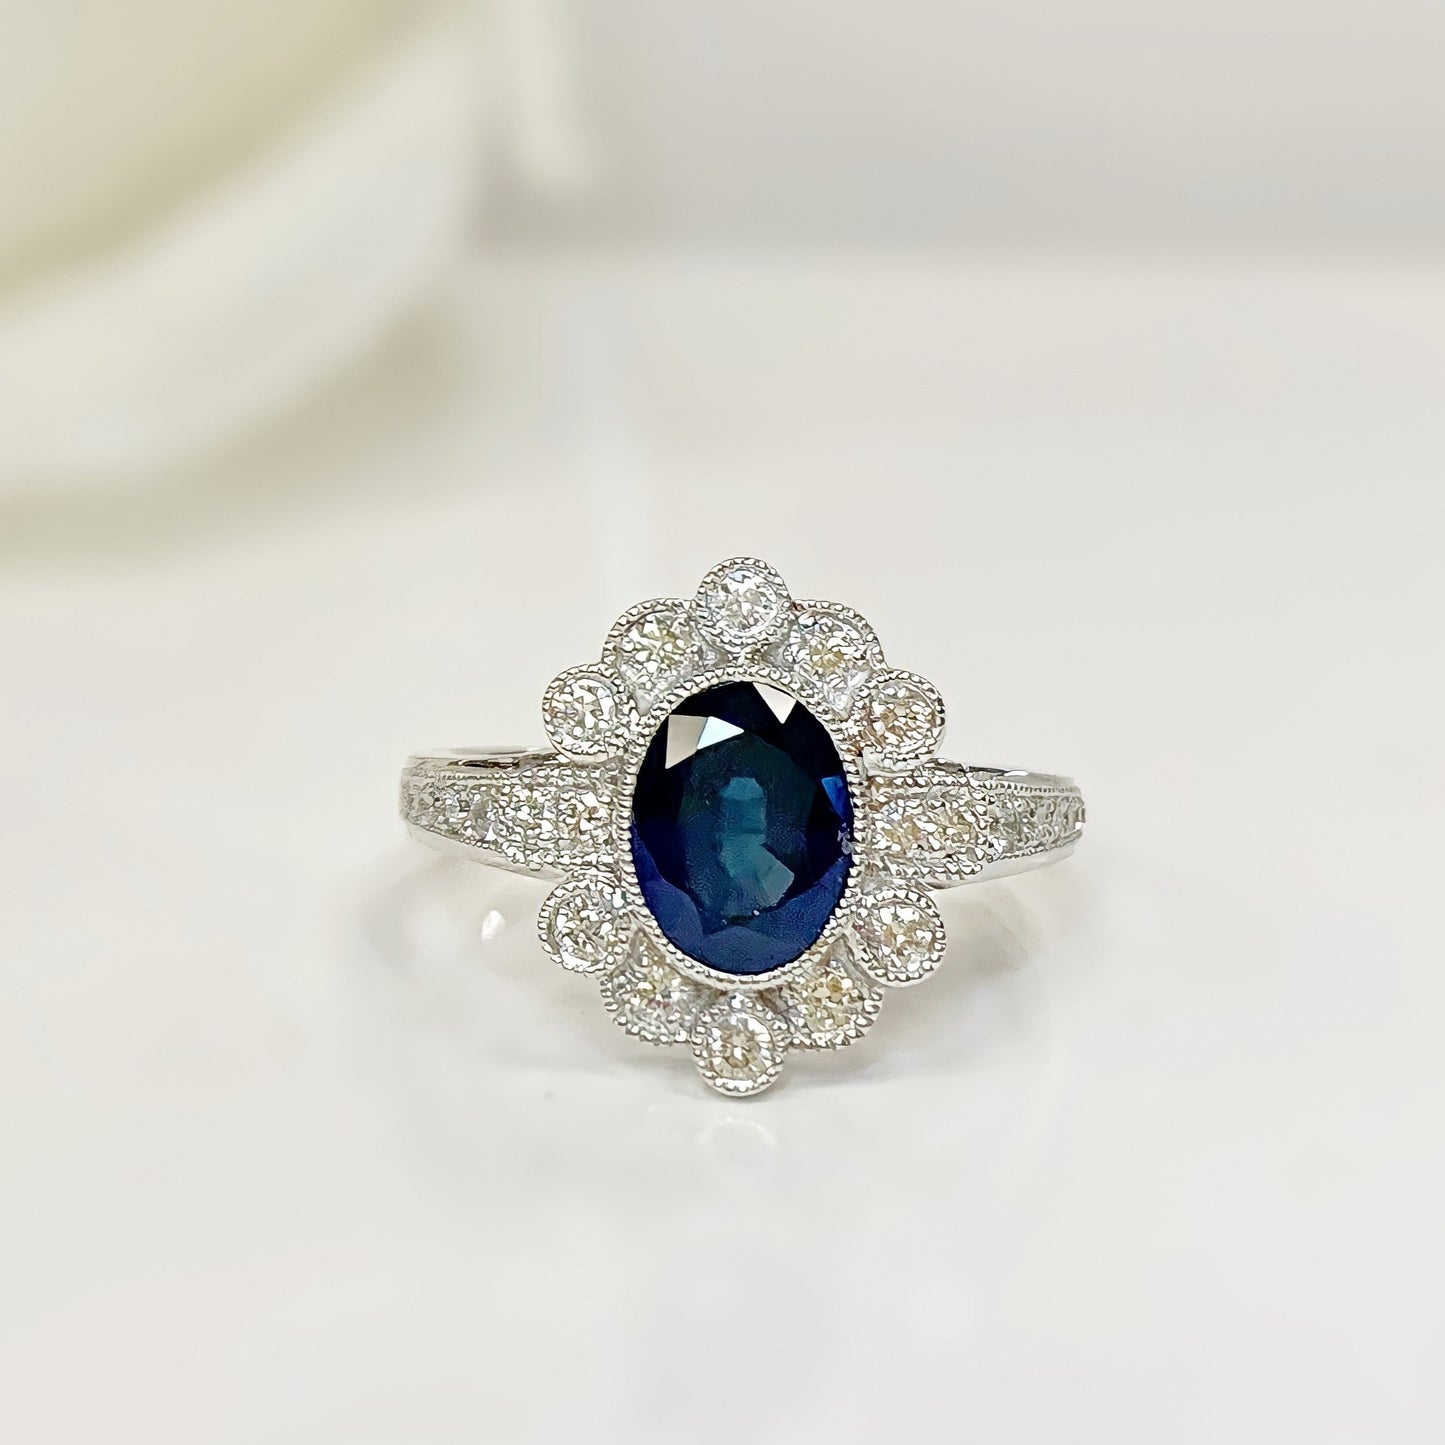 Elegant Art Deco Reproduction 18ct White Gold Sapphire and Diamond Ring - SIZE O